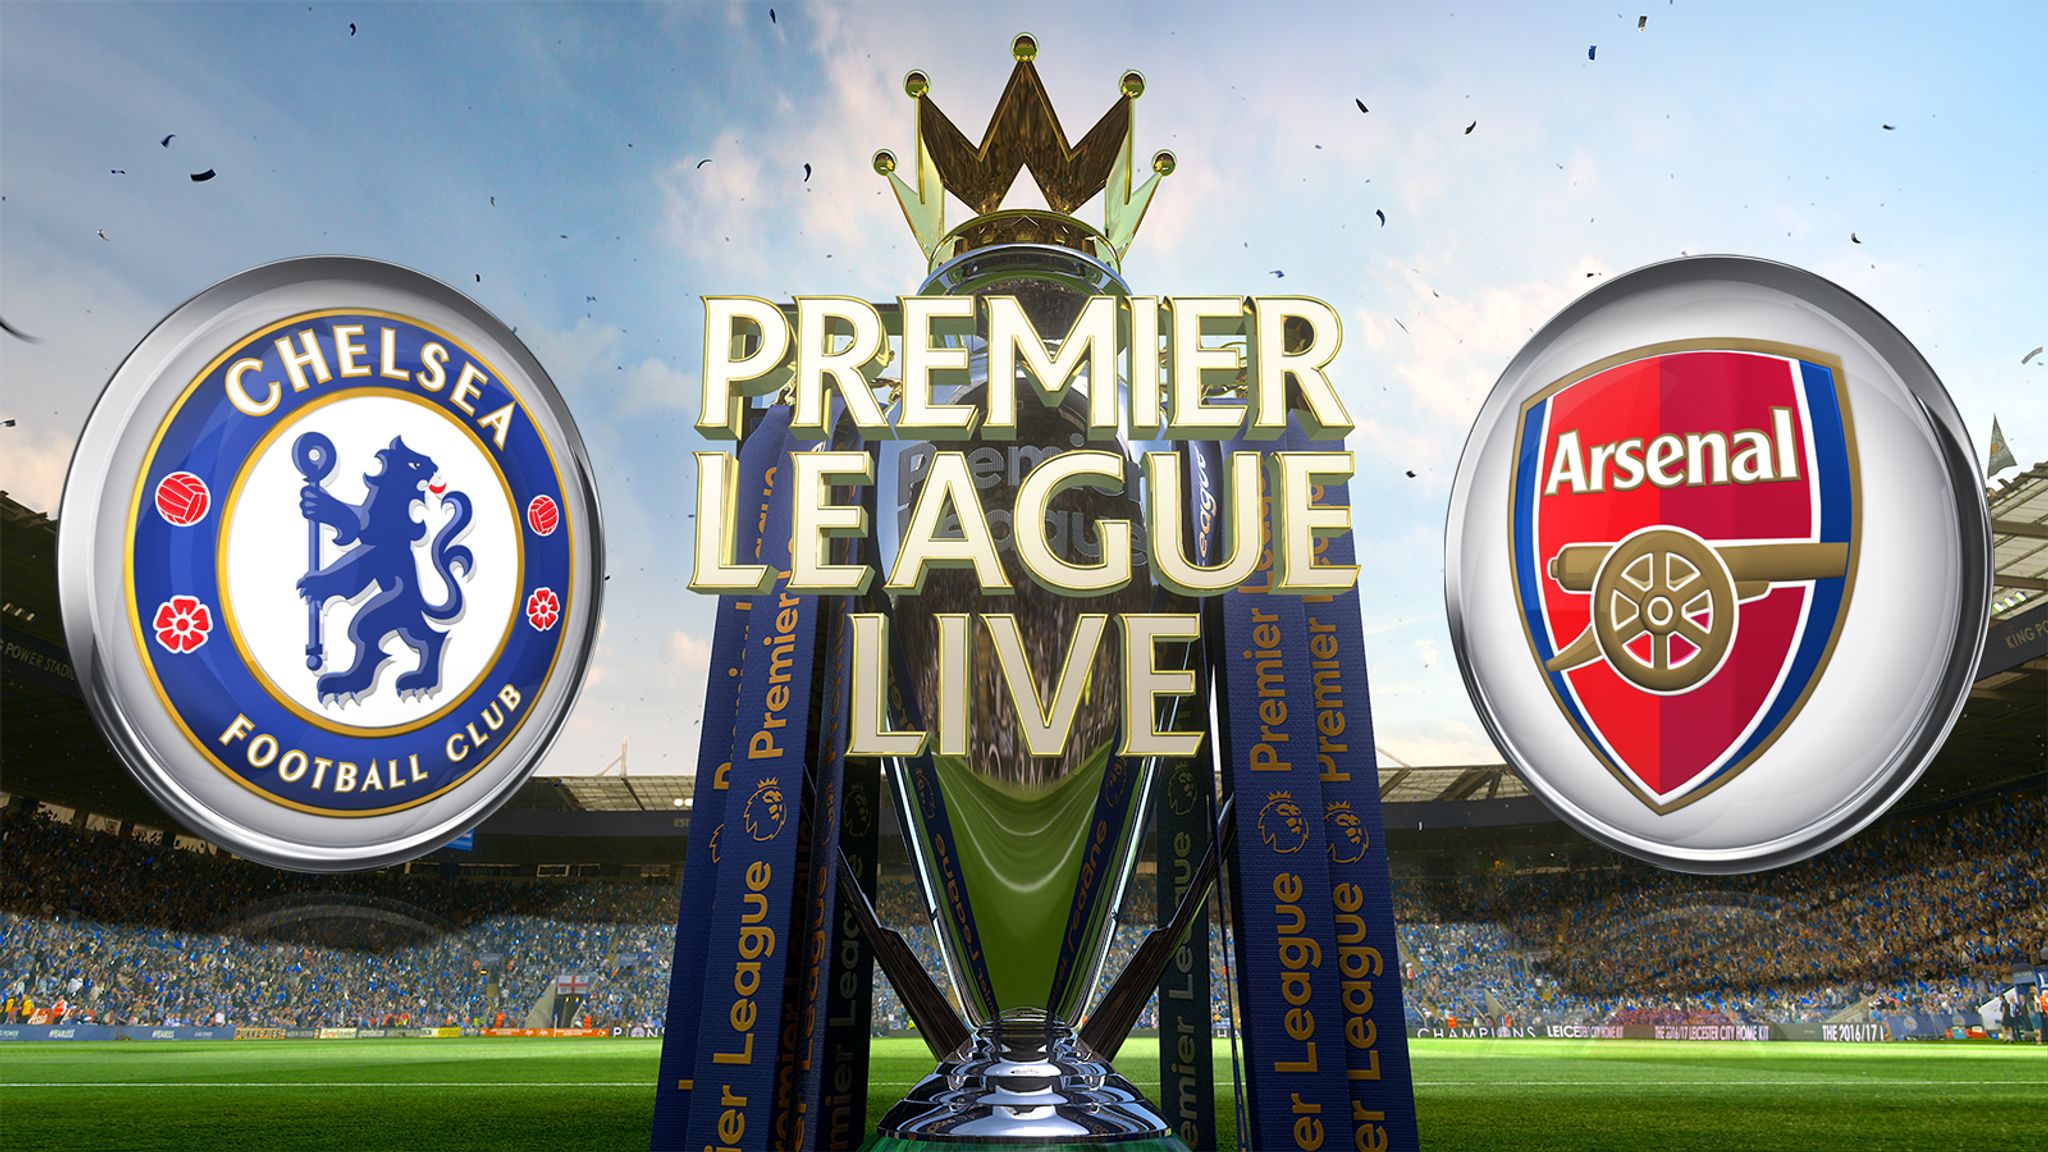 Live match preview - Chelsea vs Arsenal 04.02.2017